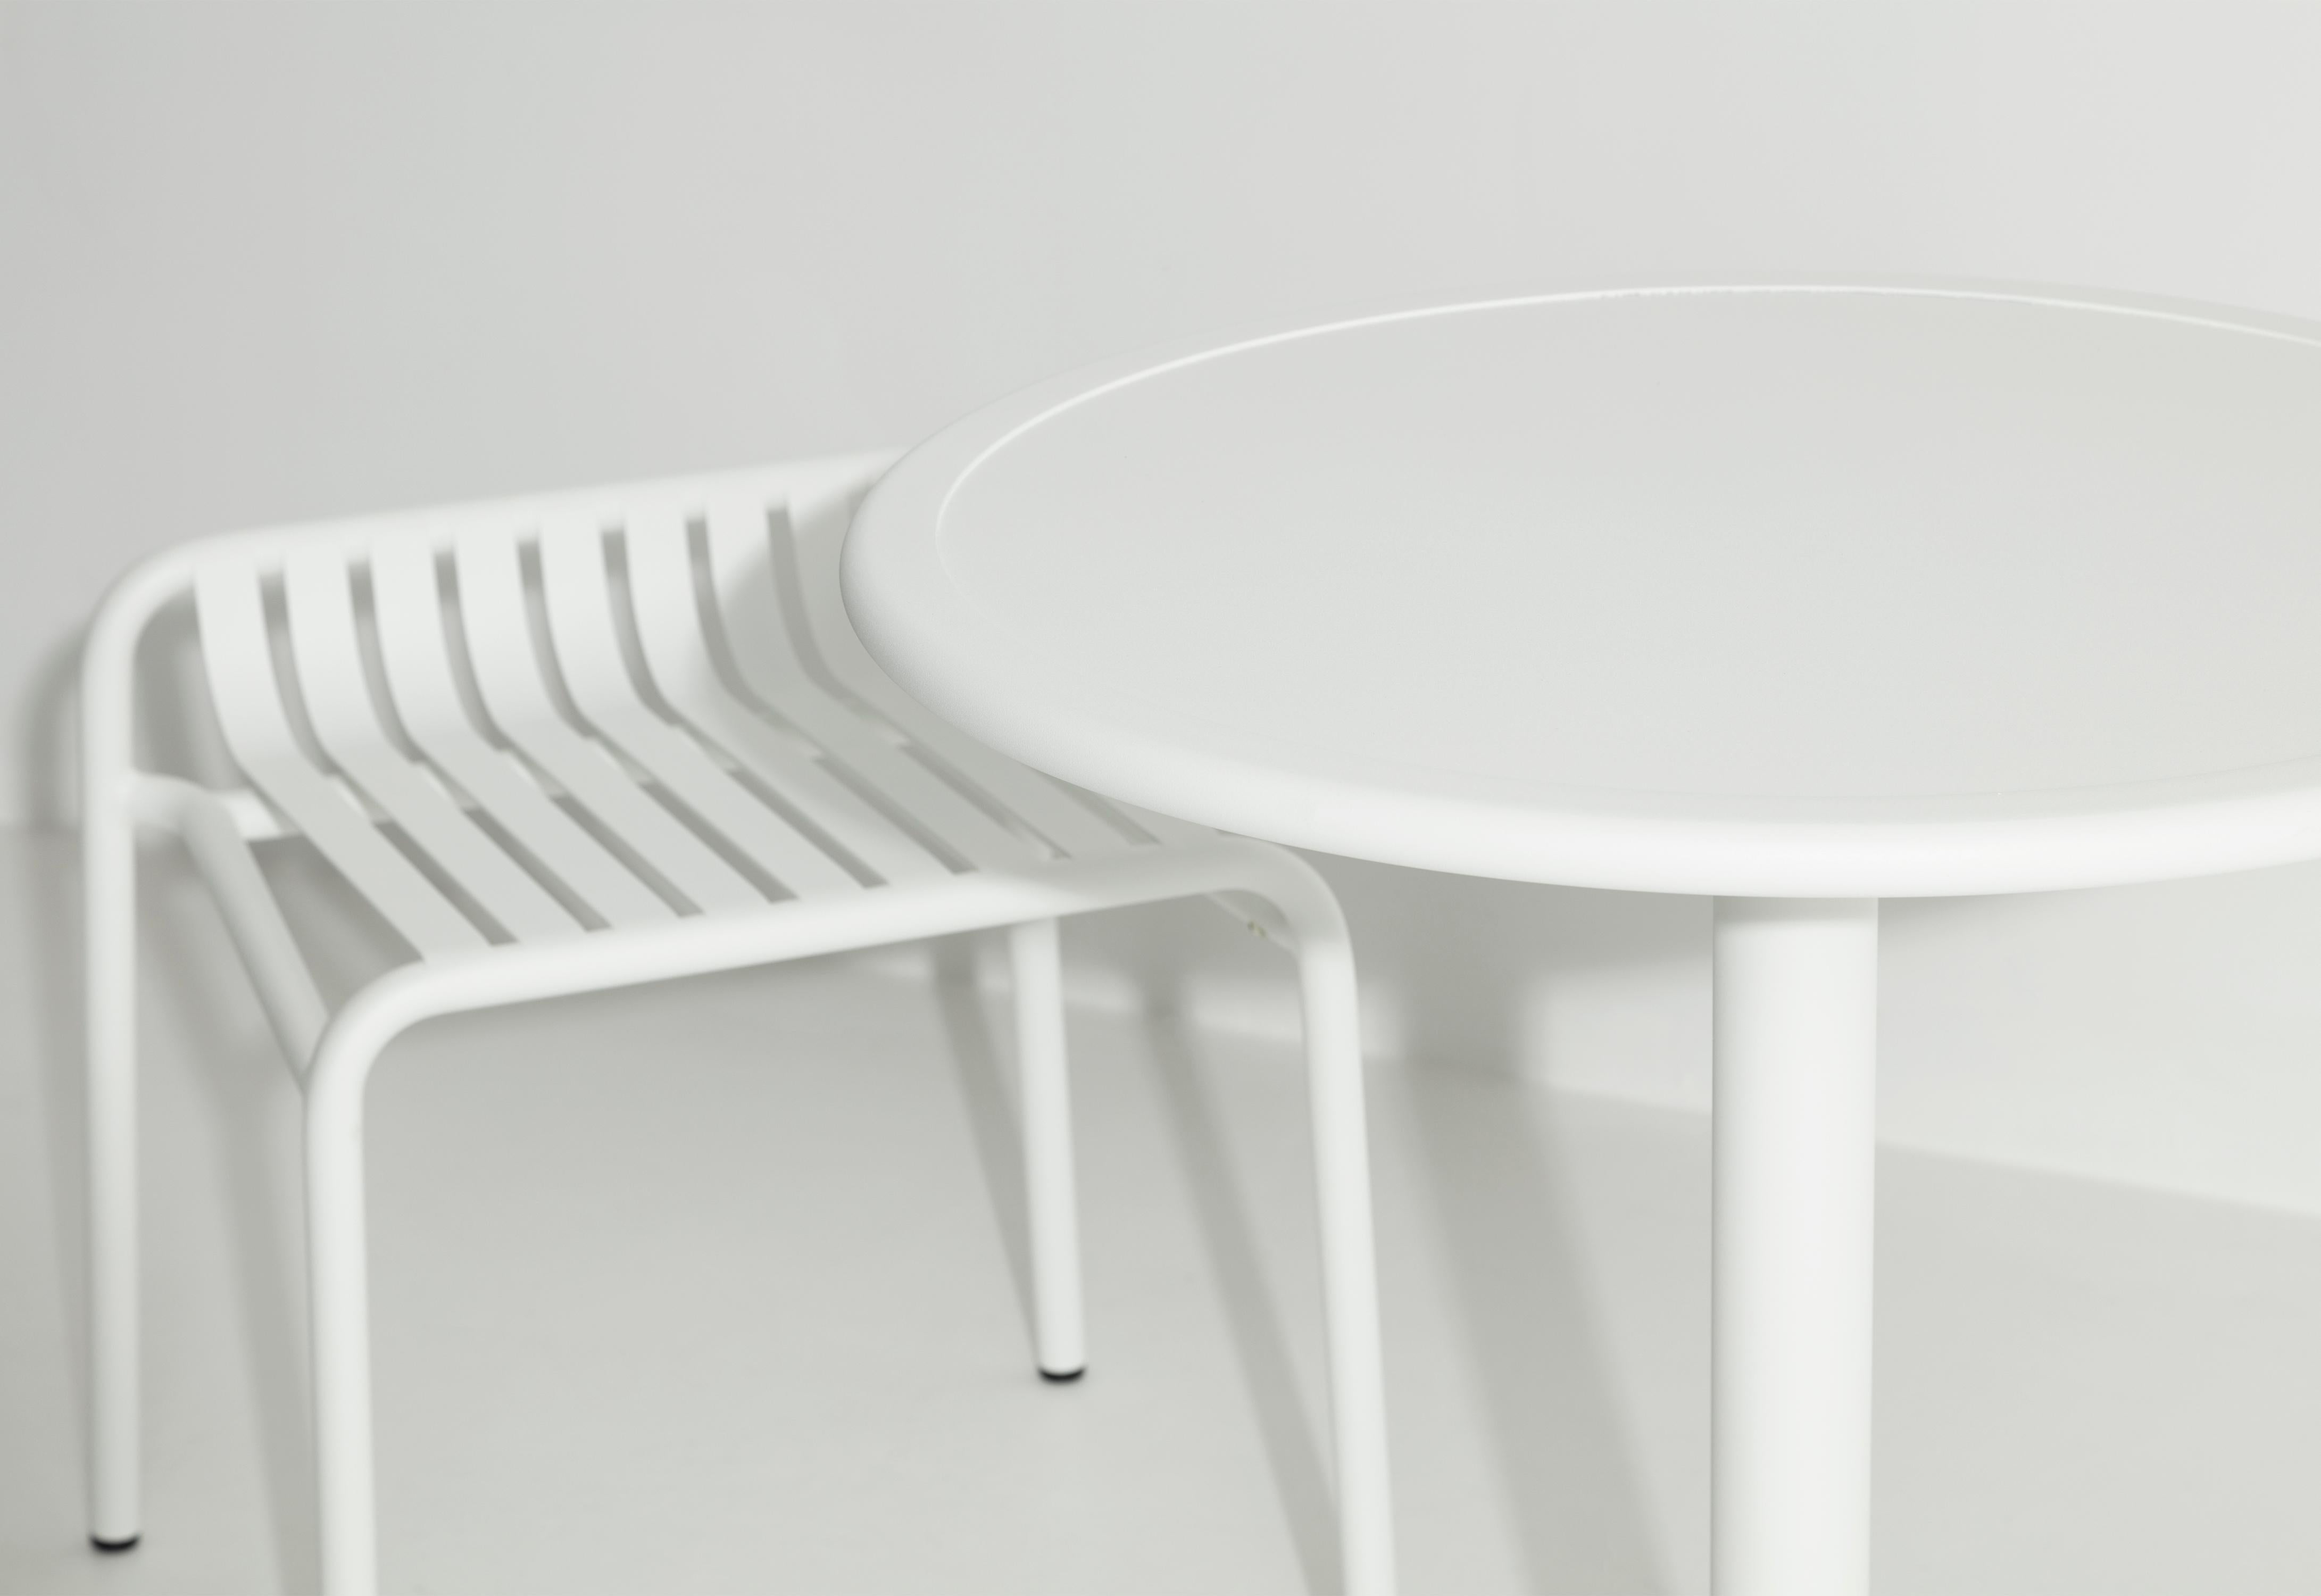 Petite Friture Week-End Round High Table in White Aluminium by Studio BrichetZiegler, 2017

The week-end collection is a full range of outdoor furniture, in aluminium grained epoxy paint, matt finish, that includes 18 functions and 8 colours for